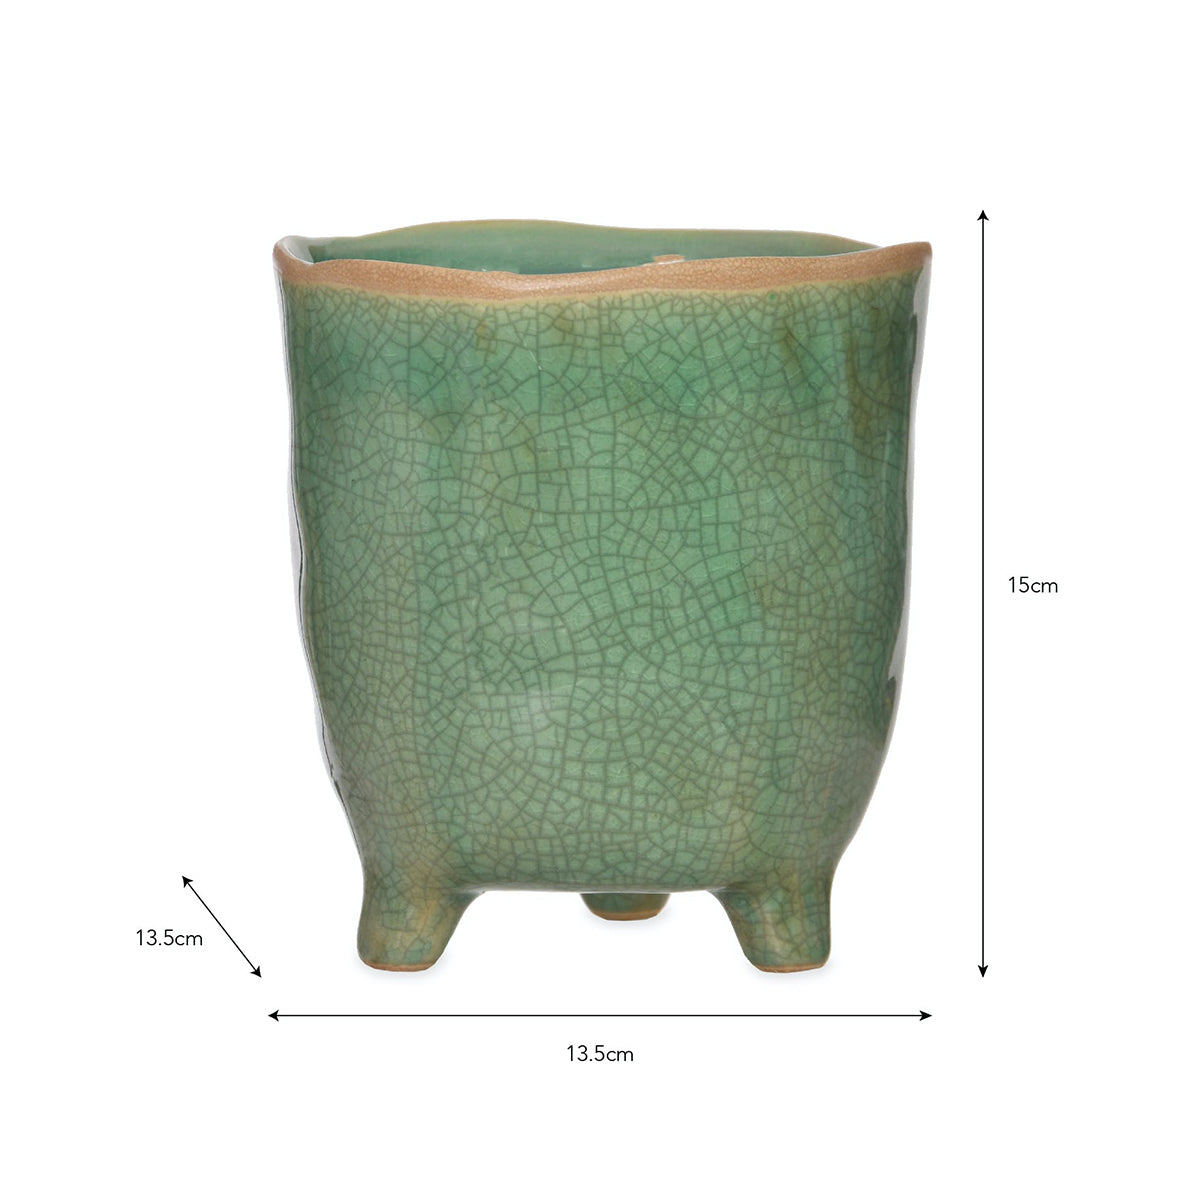 green-positano-flower-pot-large-with-crackle-glaze-dimensions-Mrs-Robinson